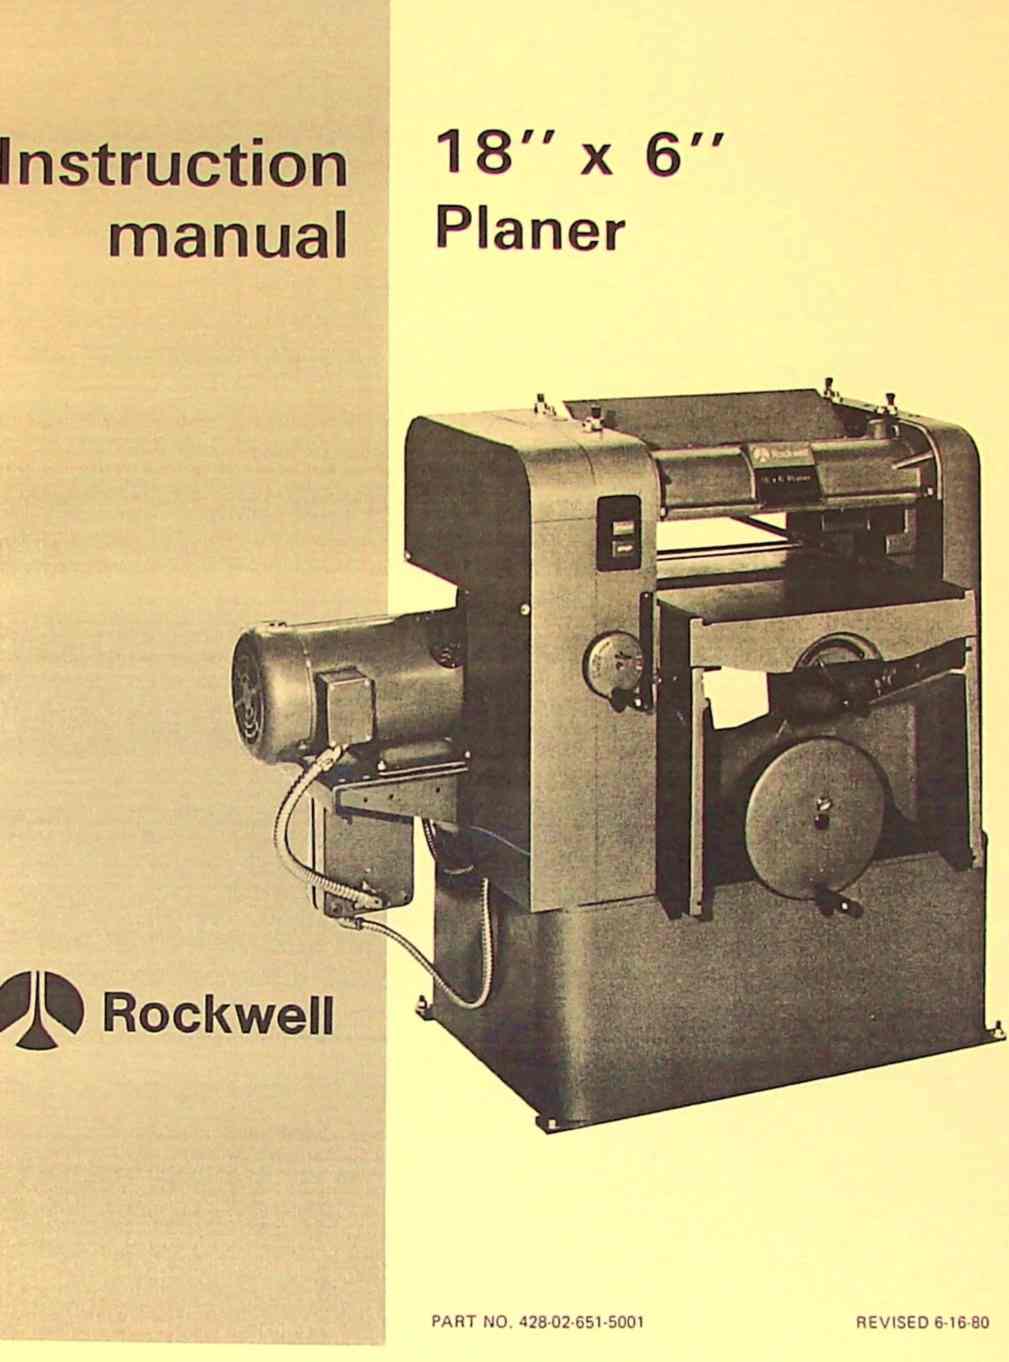 Rockwell P-24 Planer Service Manual 